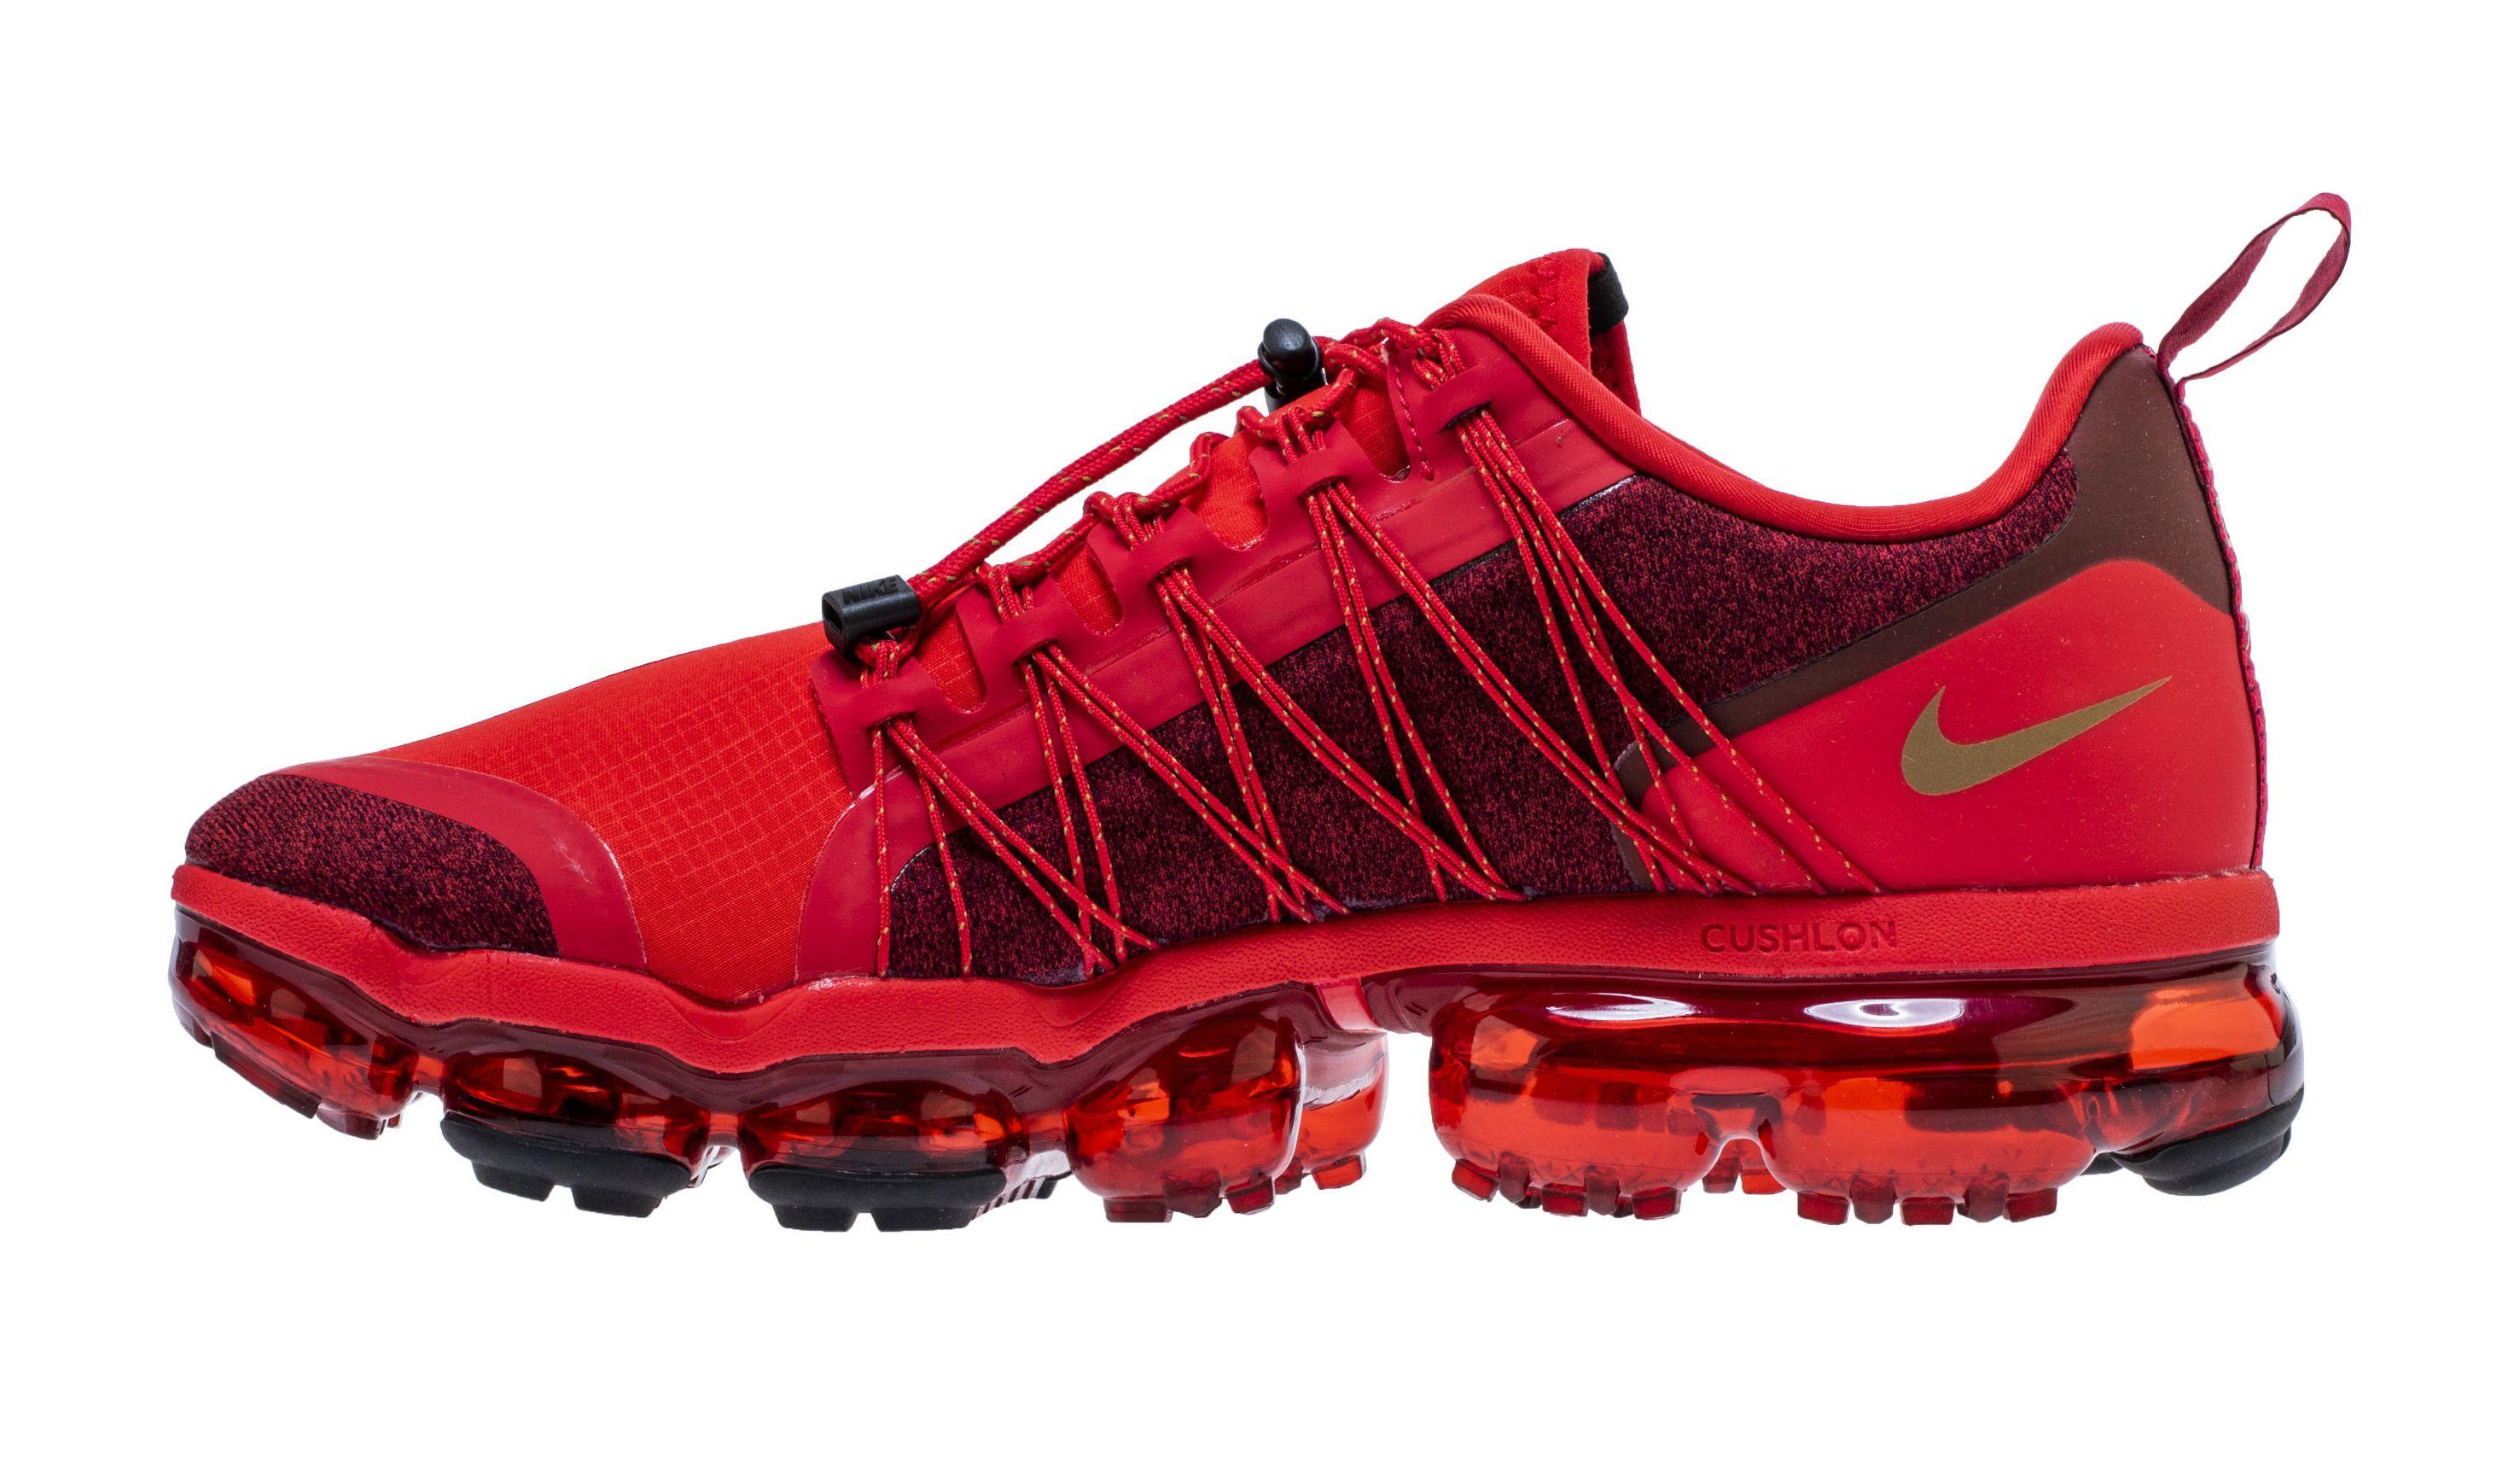 Mixed Red and Black Nike Logo - Nike Air VaporMax Run Utility Canyon Red Black Releasing Next Month ...